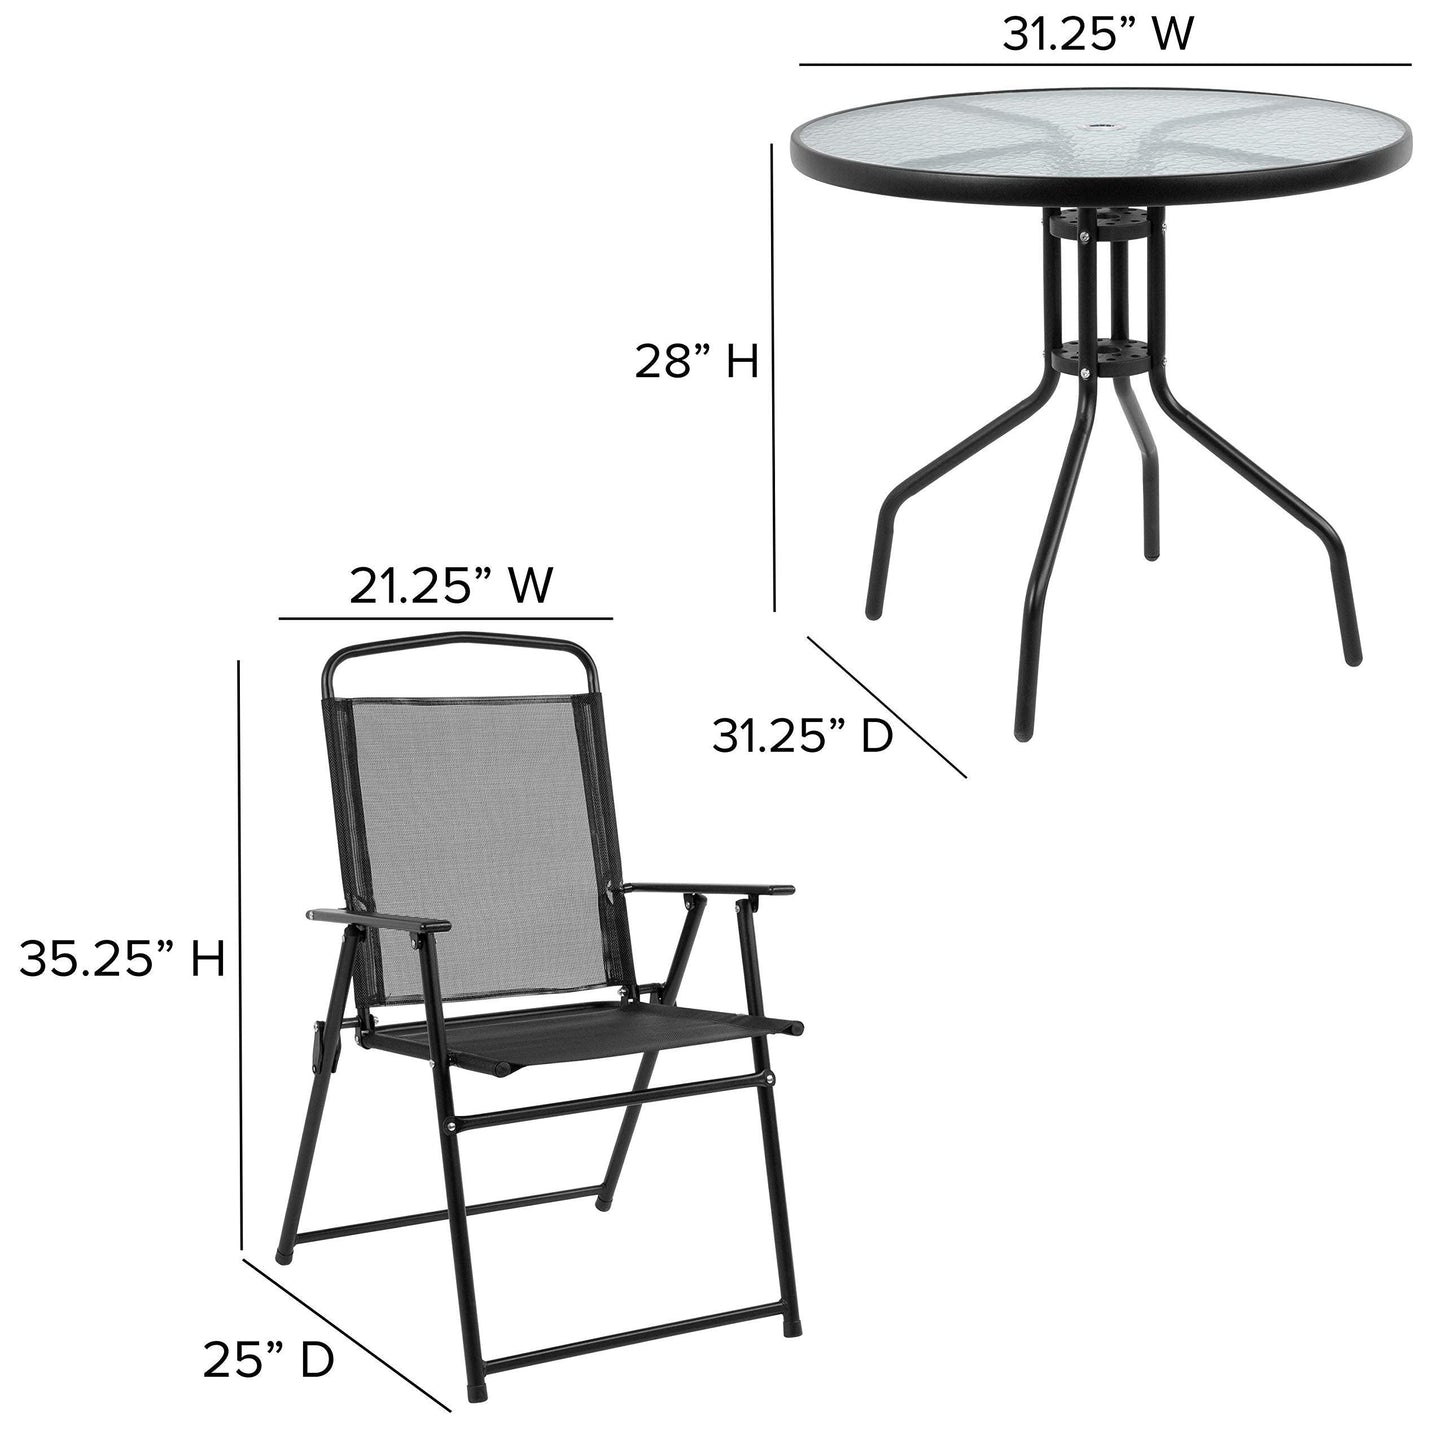 Flash Furniture Nantucket 6-Piece Patio Dining Set with Glass Table, 4 Folding Chairs, and Umbrella, Outdoor Patio Table, Chairs, and Umbrella Set, Black - CookCave